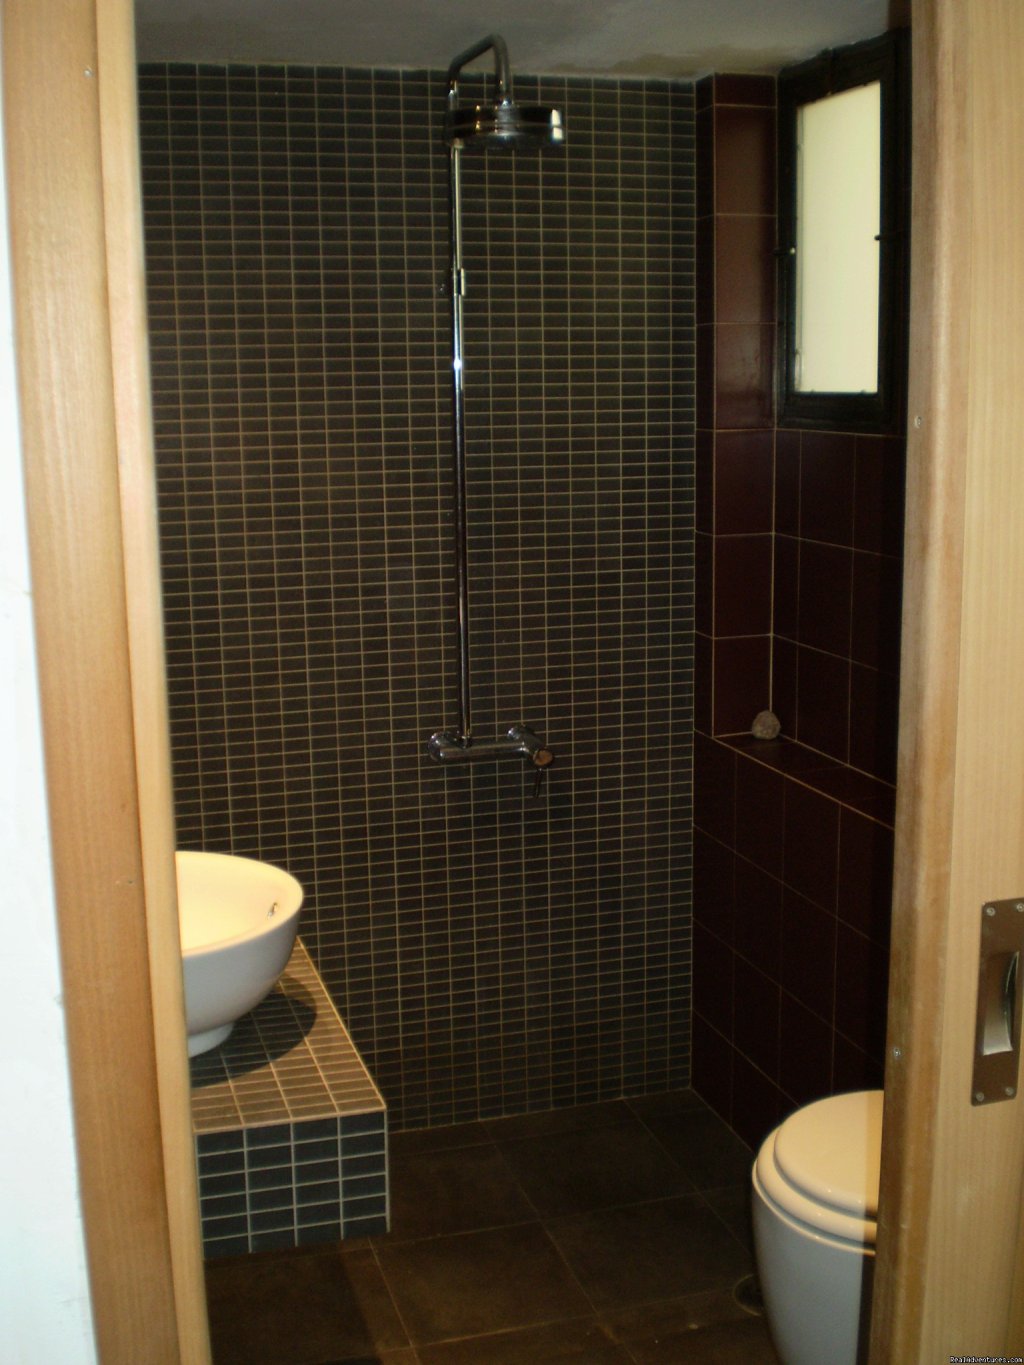 Bathroom | 2 Bedroom Funky Furnished Beach Flat For Rent | Image #3/5 | 